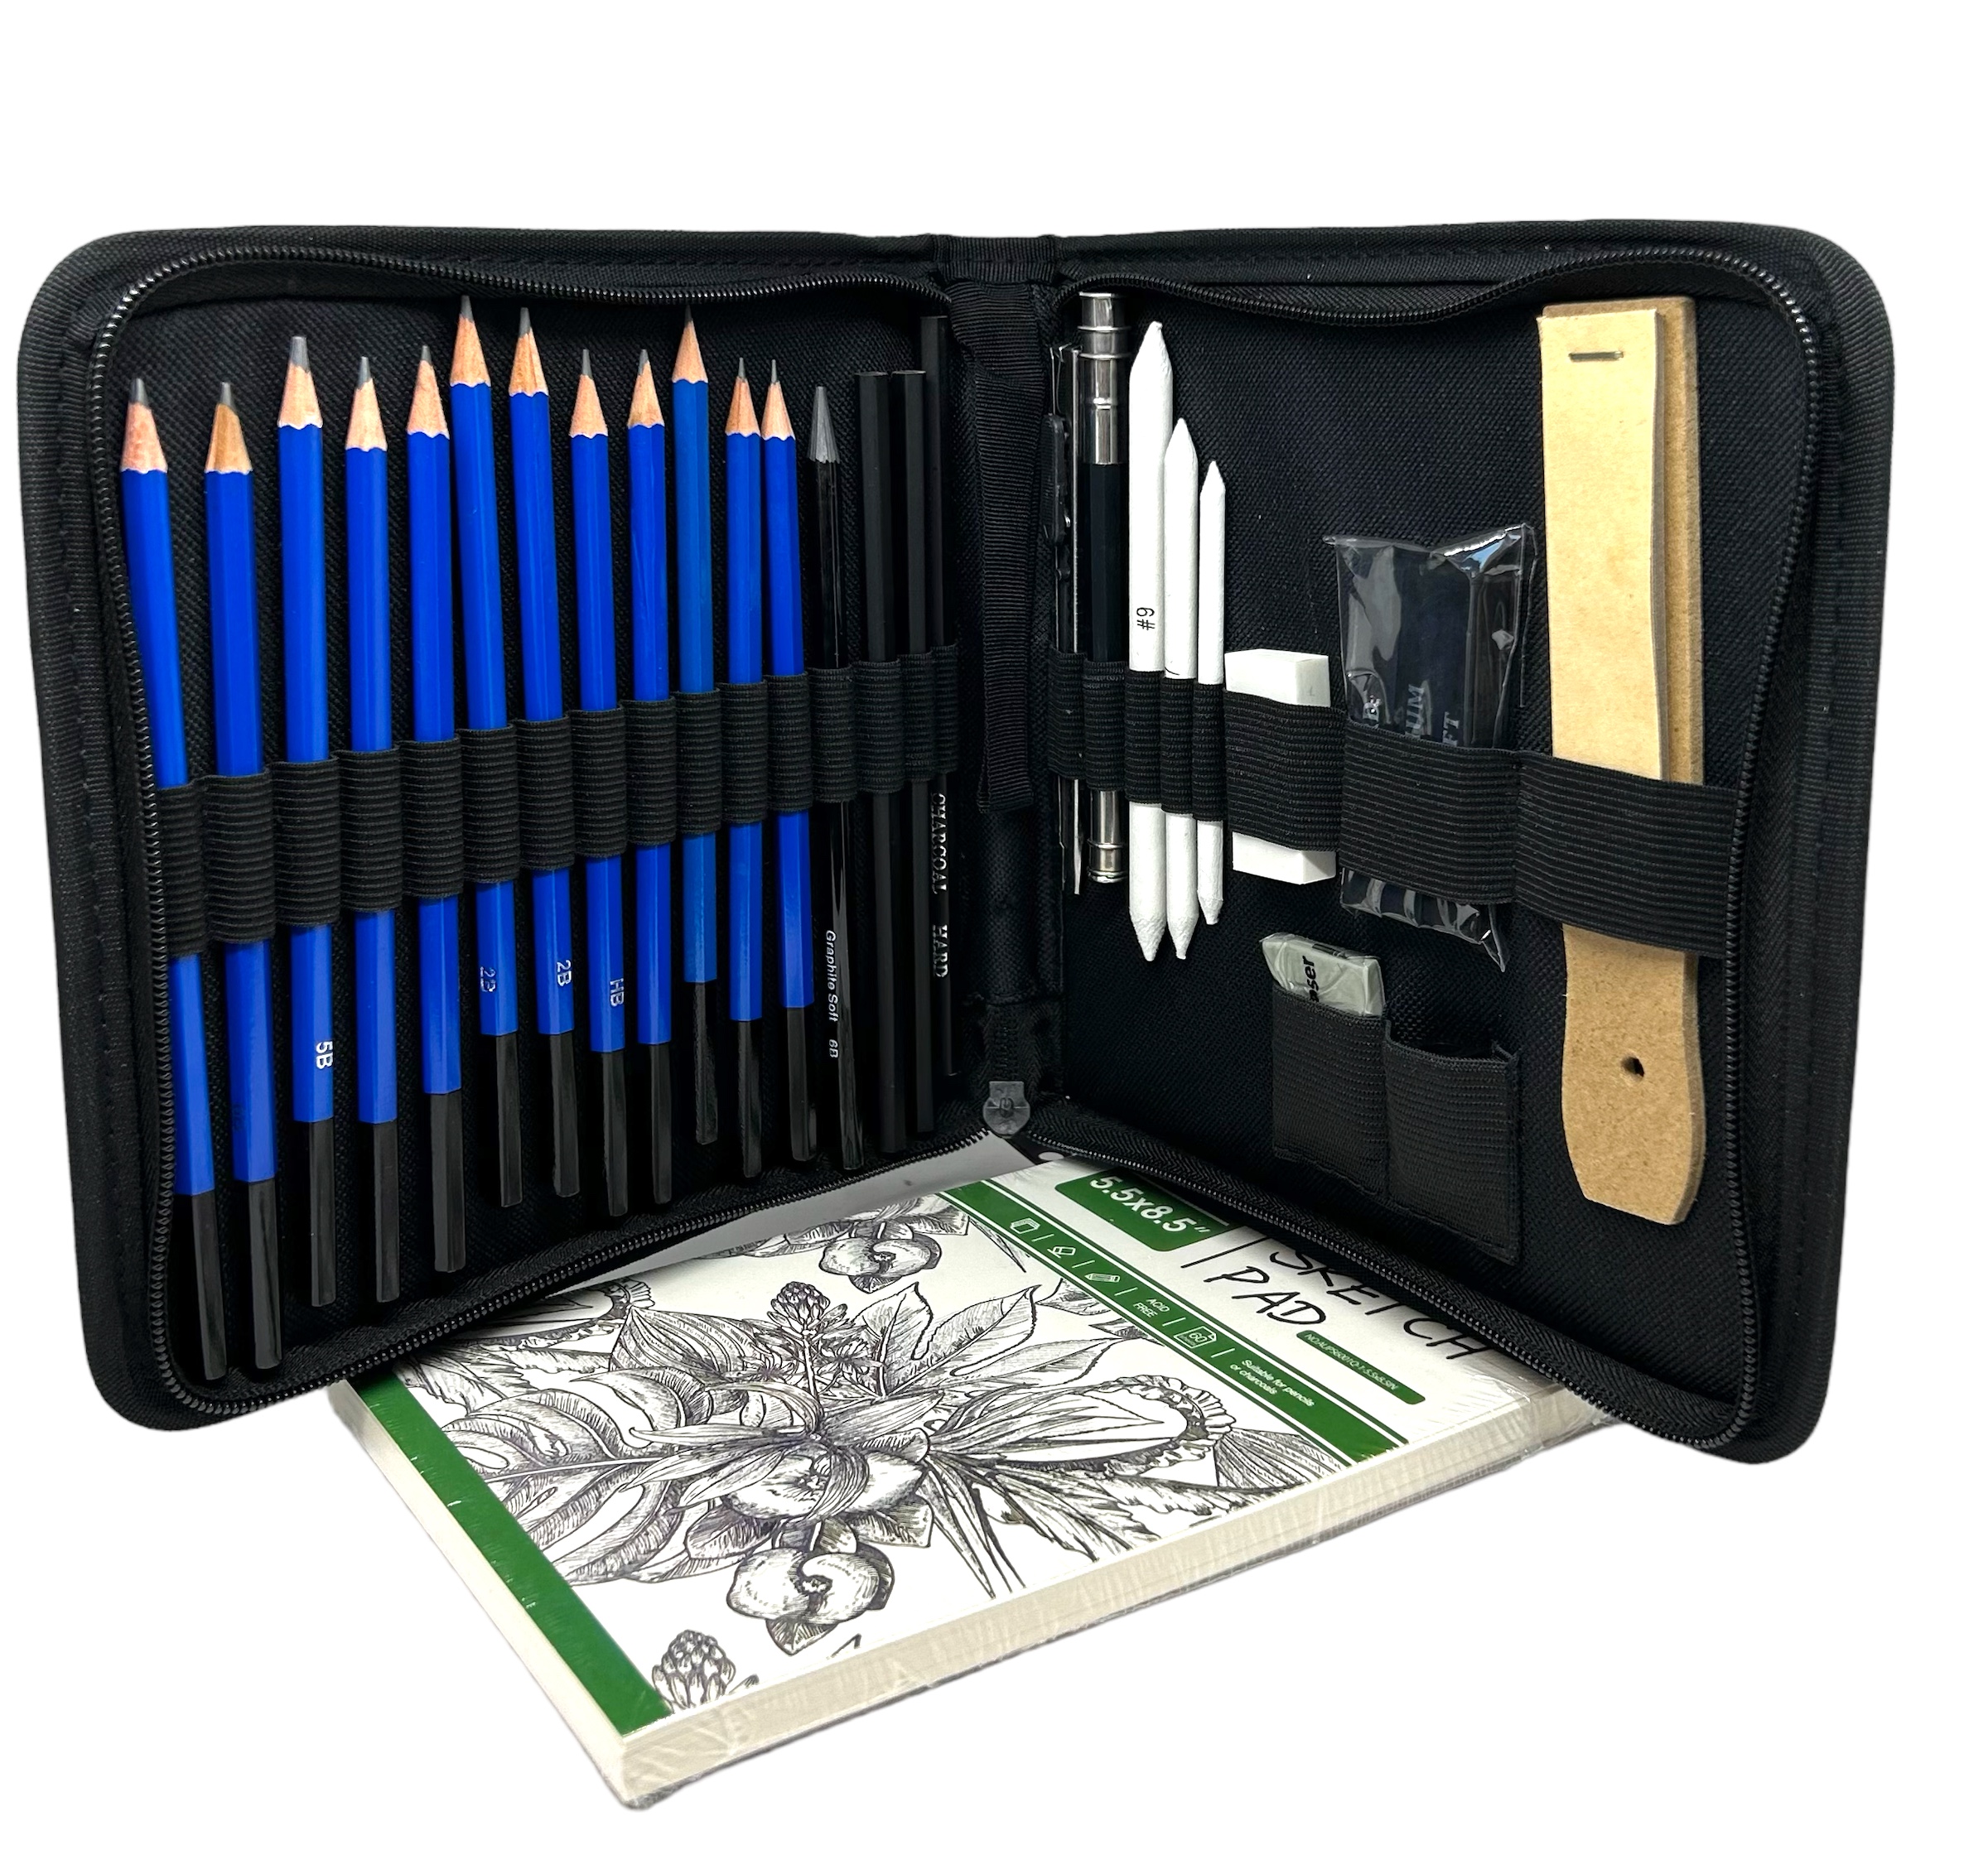 AUREUO Drawing Set - Pencil Set for Sketching and Drawing with 5.5